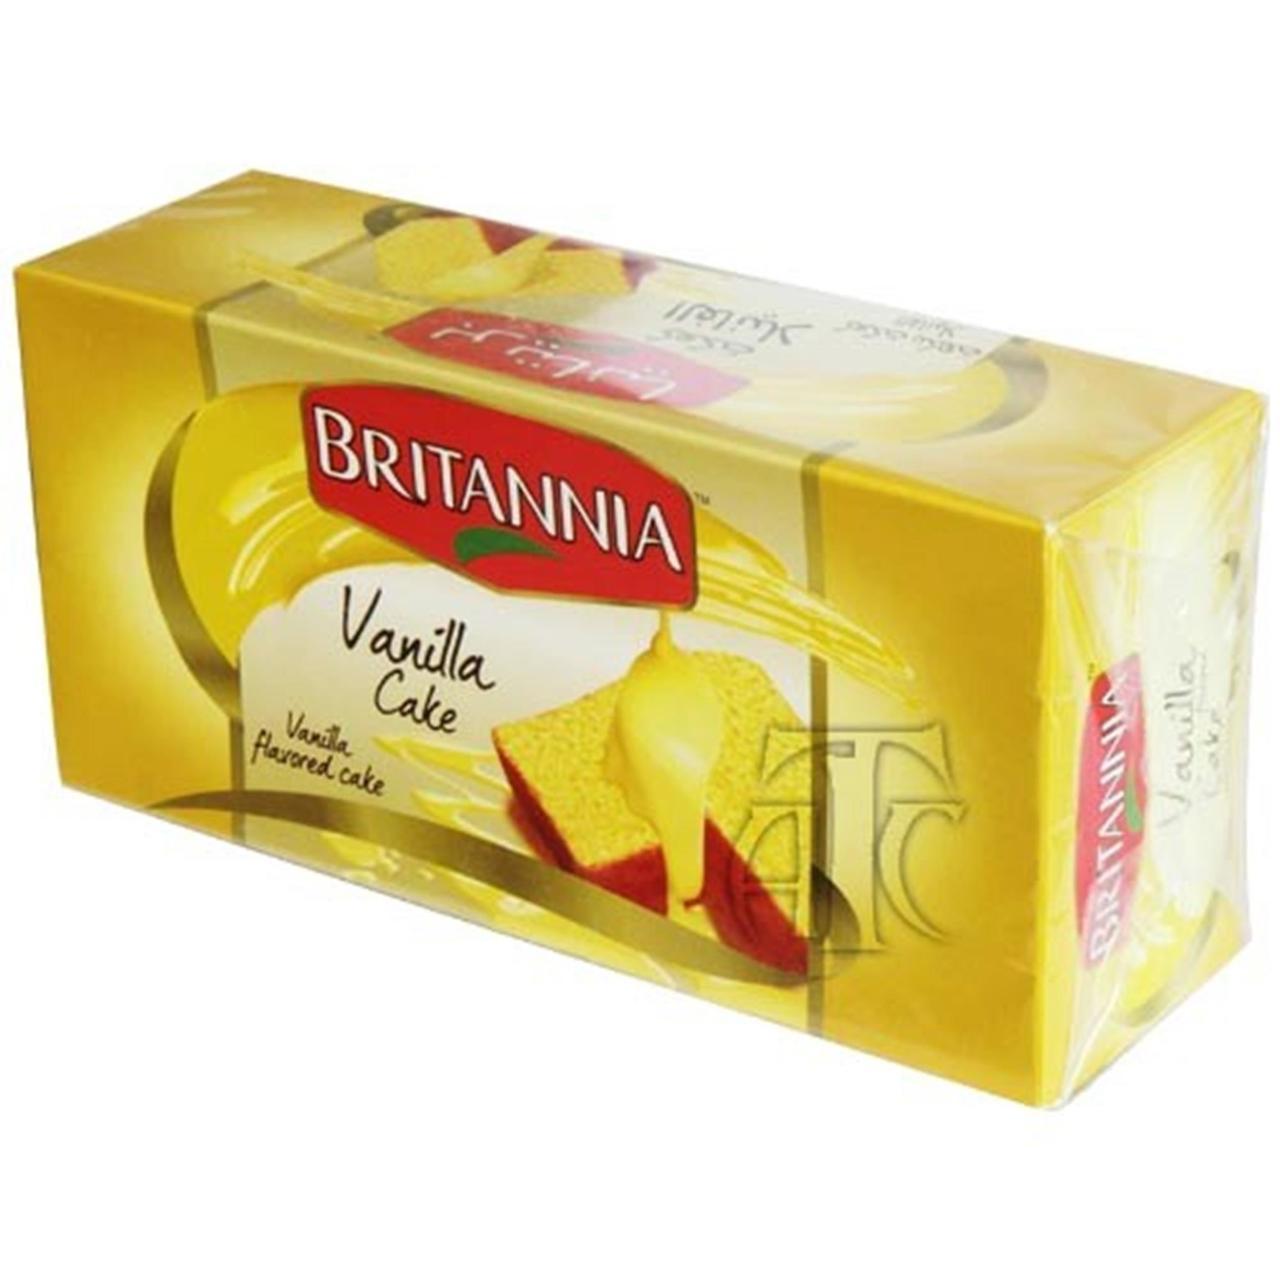 Buy Britannia Bar Cake Pineapple 30 Gm Pouch Online At Best Price of Rs 15  - bigbasket